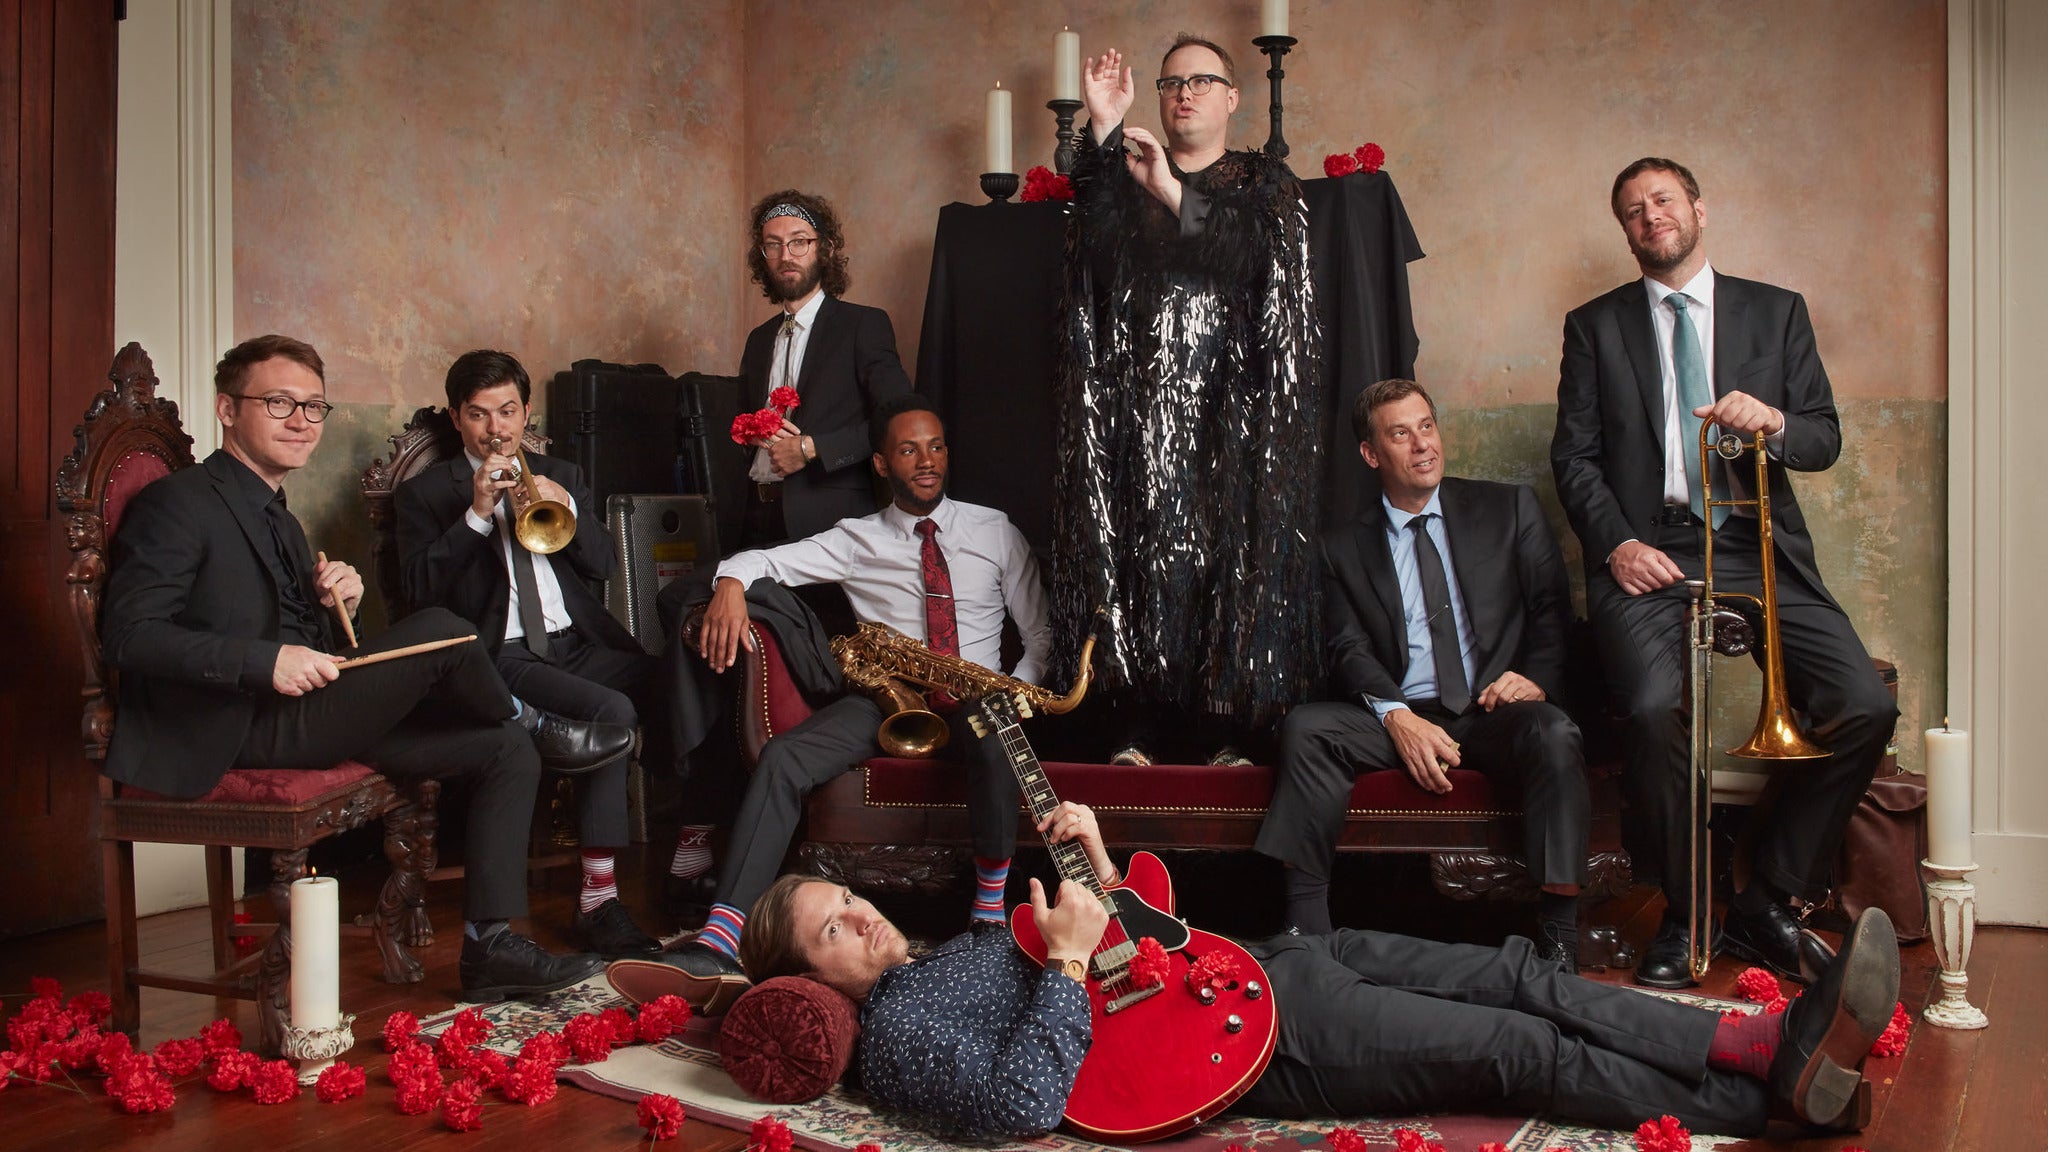 St. Paul and the Broken Bones in North Myrtle Beach promo photo for Spotify presale offer code